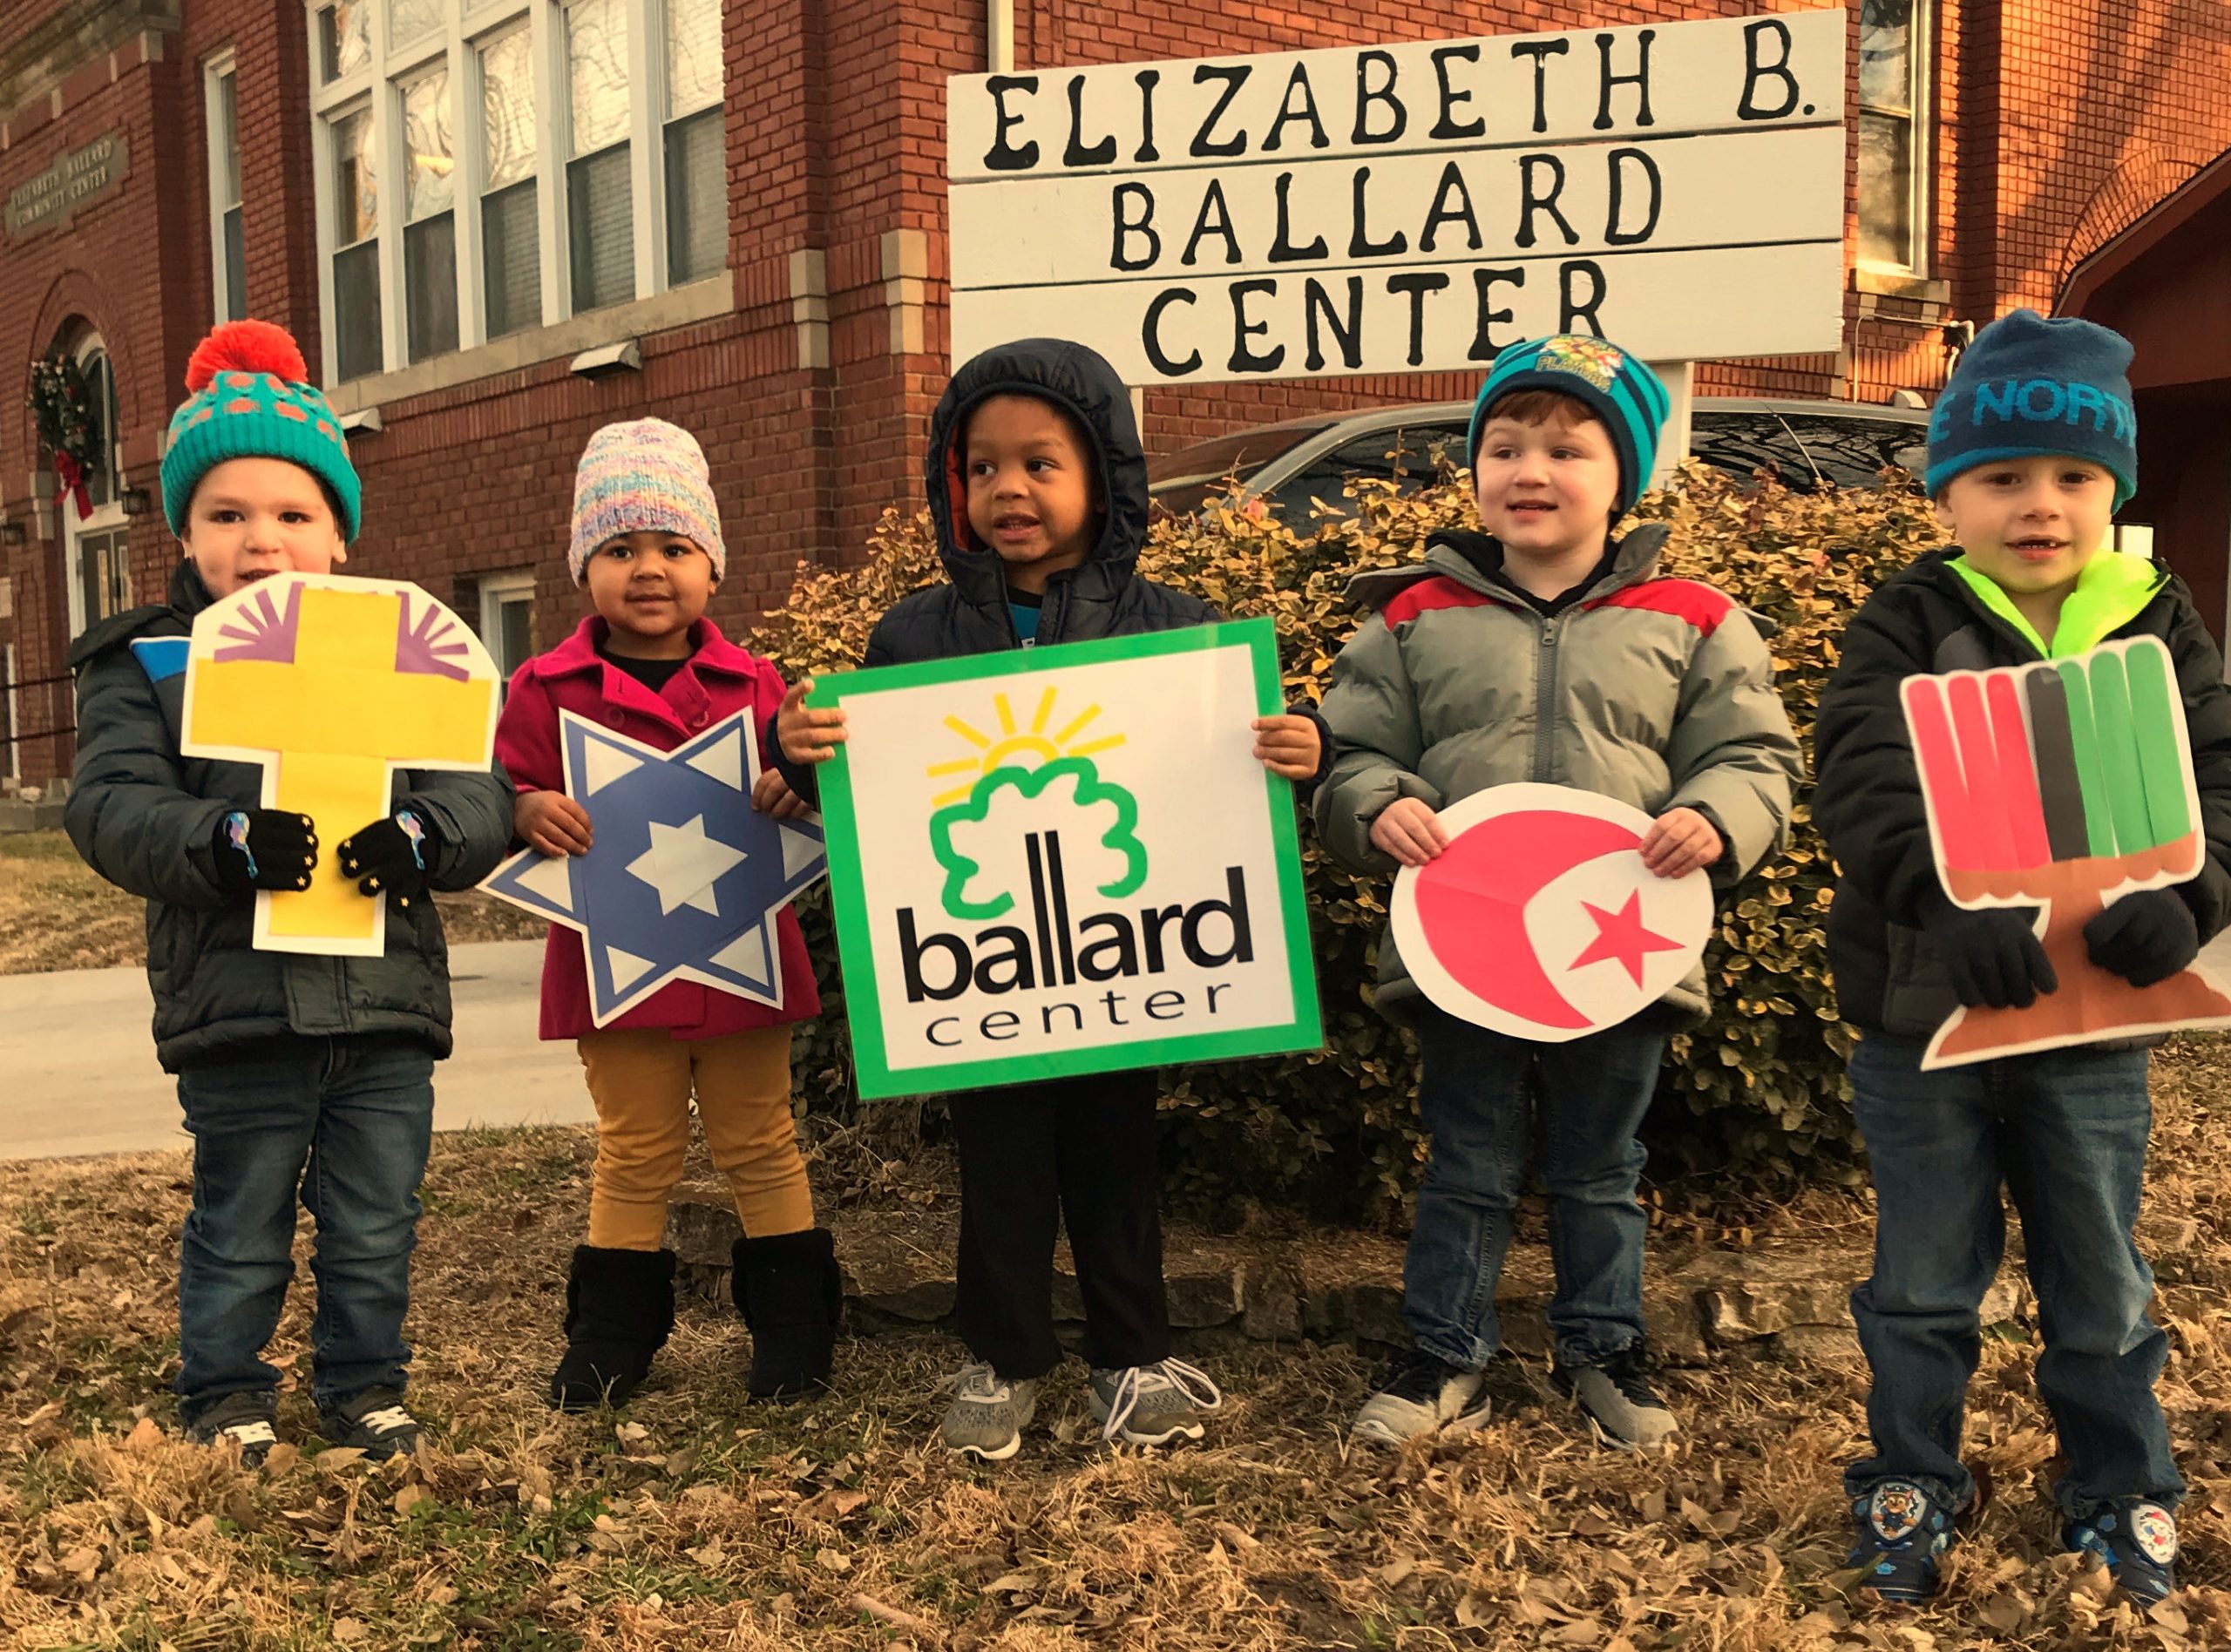 five young children dressed for the cold standing in front of a sign reading Elizabeth B. Ballard Center. Each is holding a religious symbol